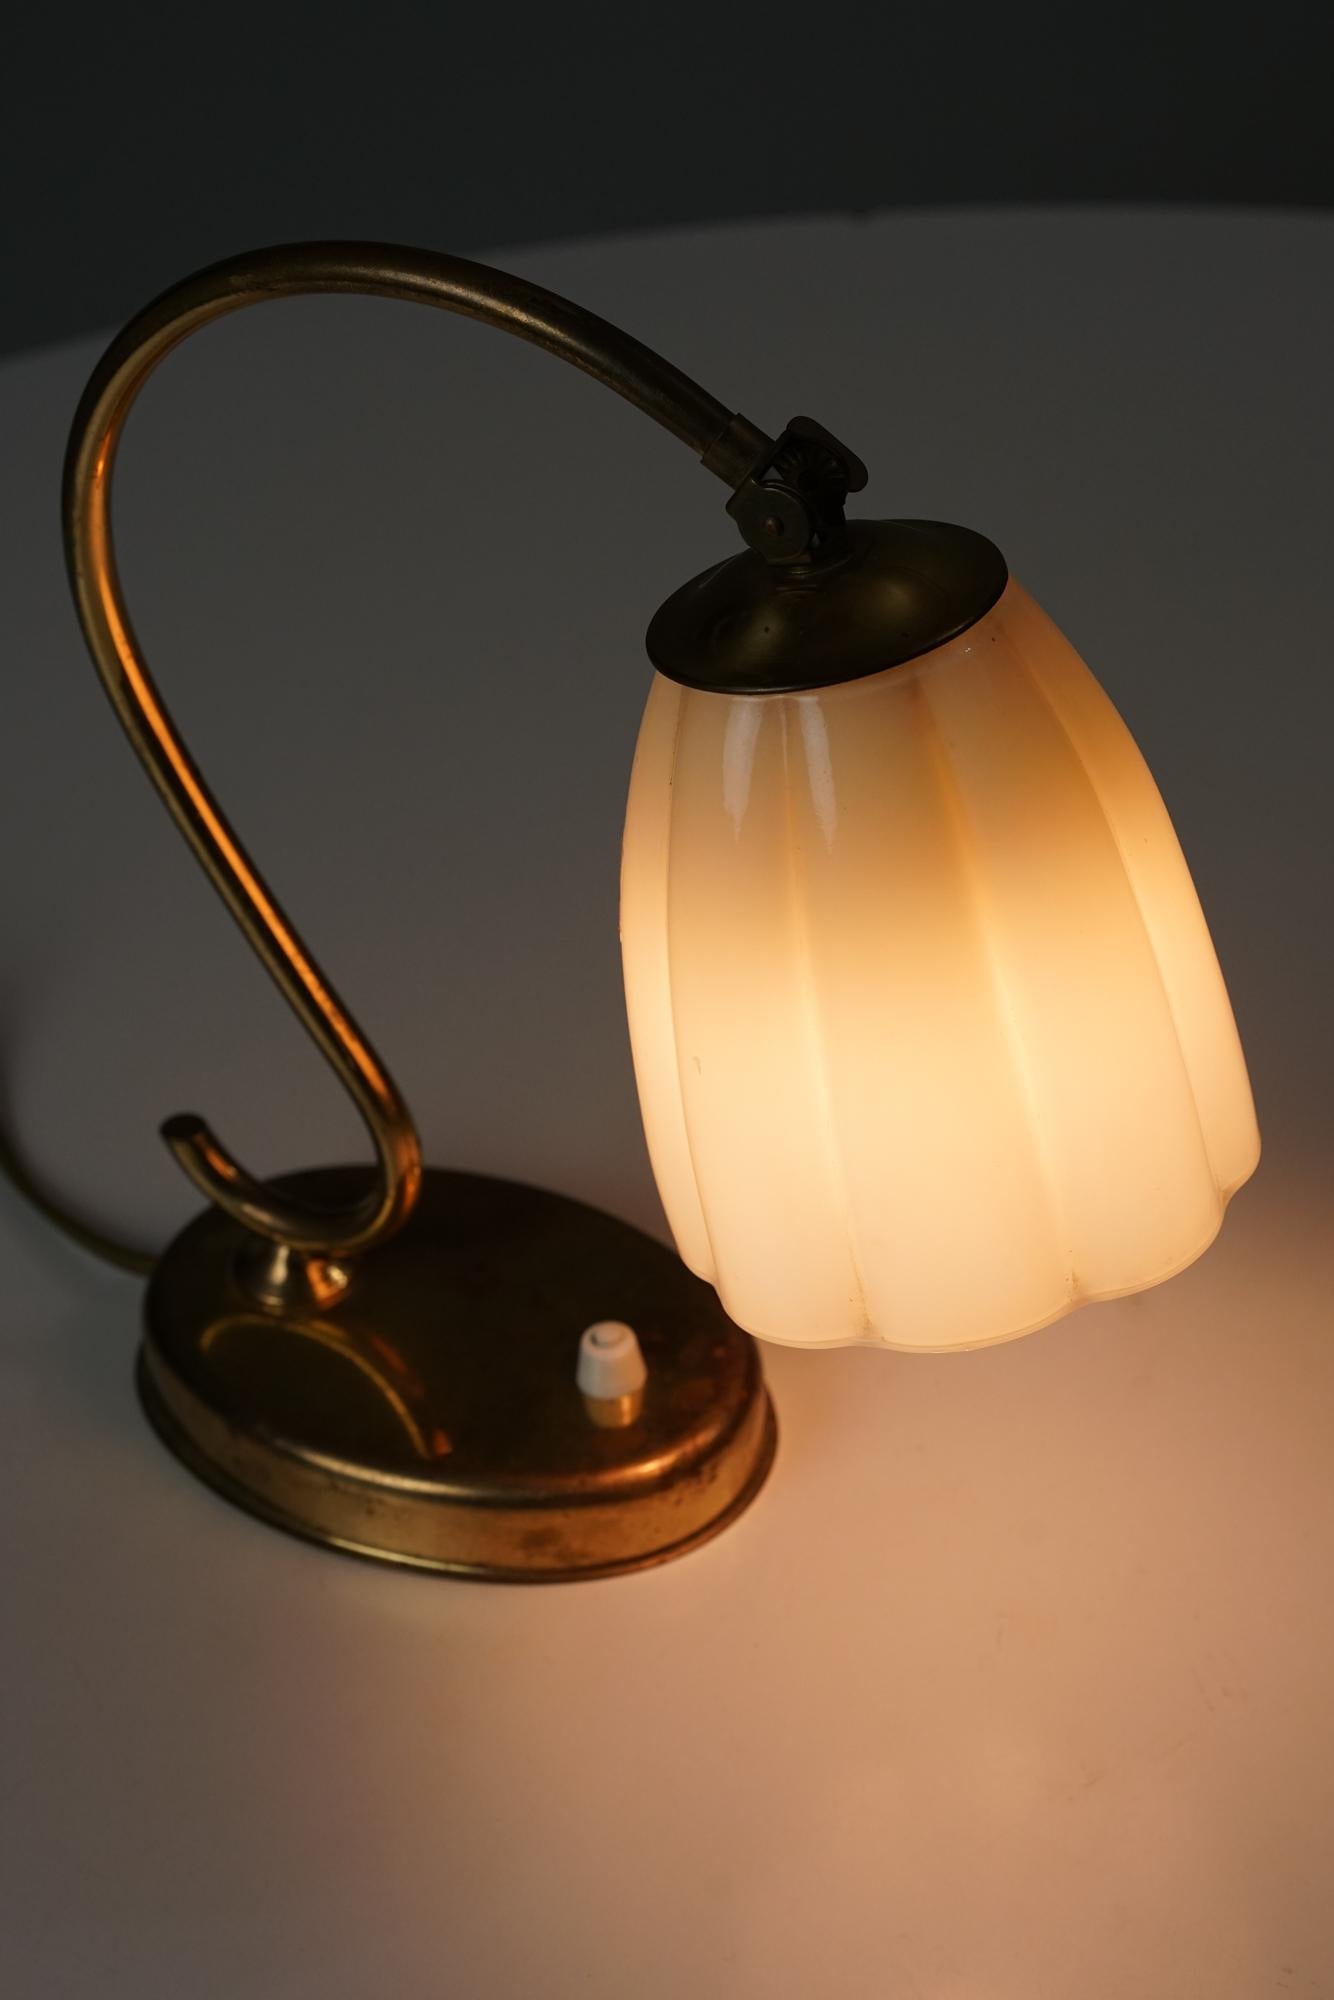 Table-/wall light manufactured by Itsu from the 1950s.Brass with opaline glass shade. Manufacturer's stamp on the bottom. Good vintage condition, minor patina and wear consistent with age and use. Beautiful Scandinavian Modern design.